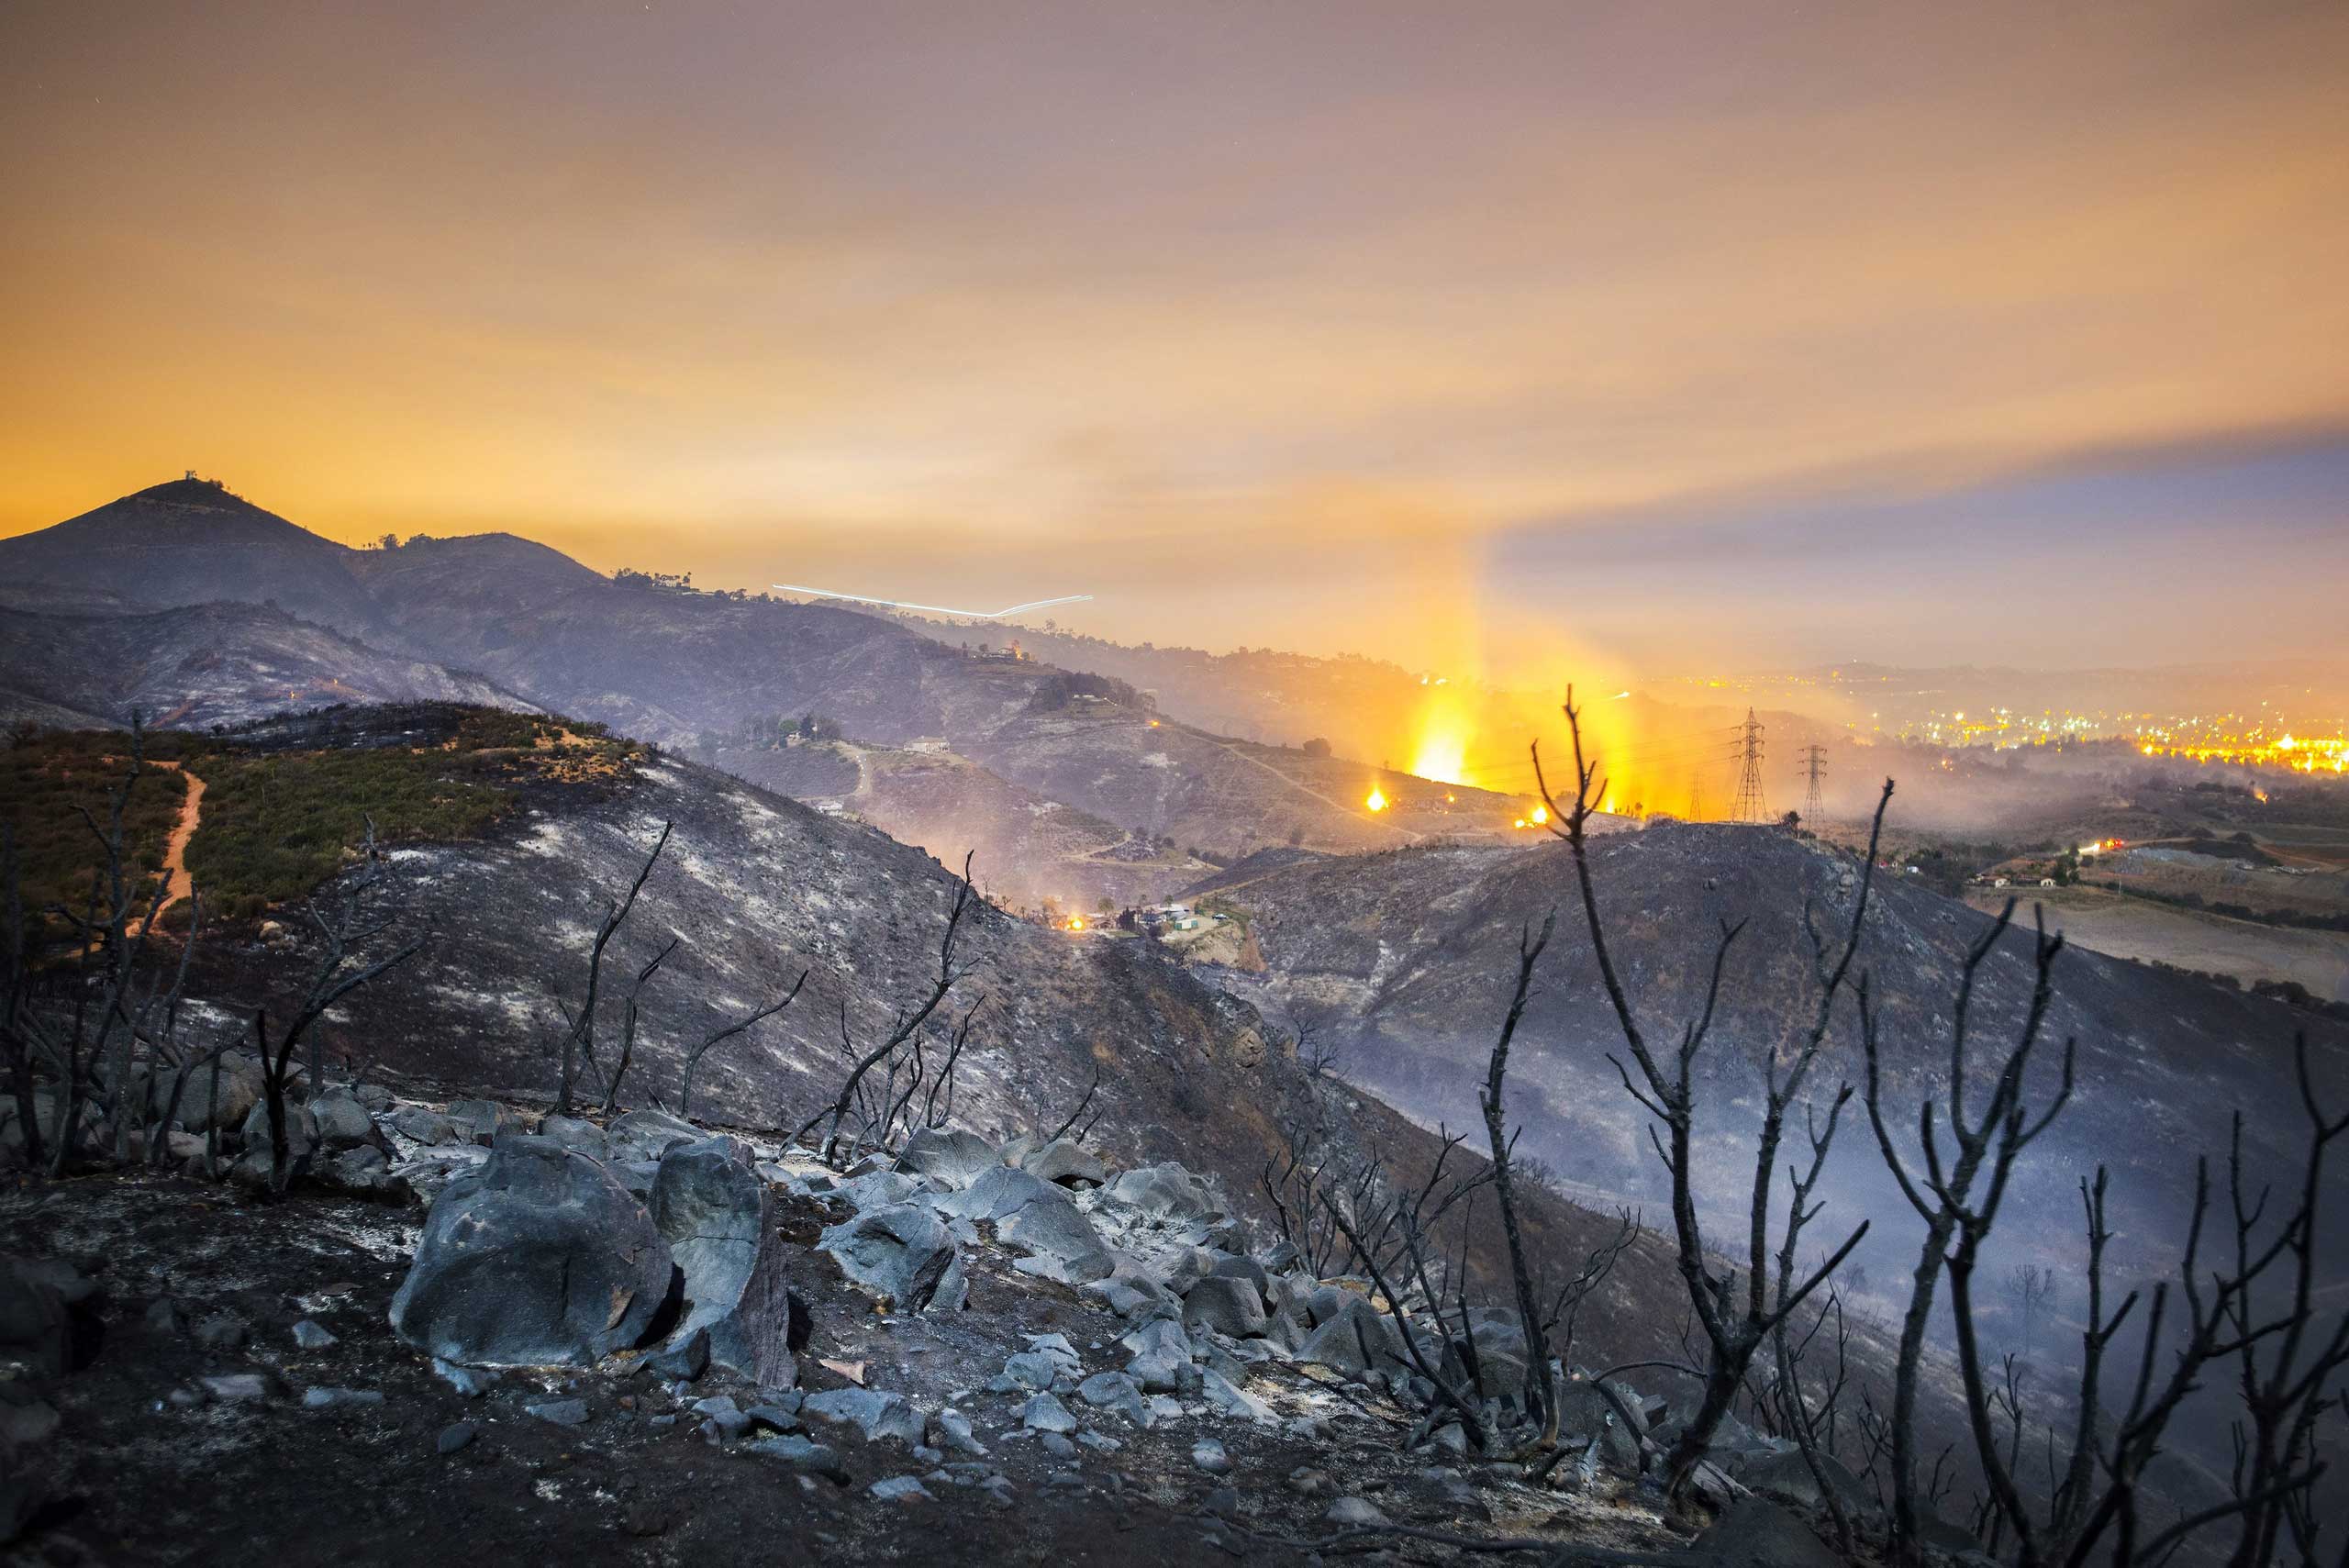 A long exposure shows smolderings remains of overnight fires on the hillsides of San Marcos, San Diego county, California, USA, early May 16, 2014.